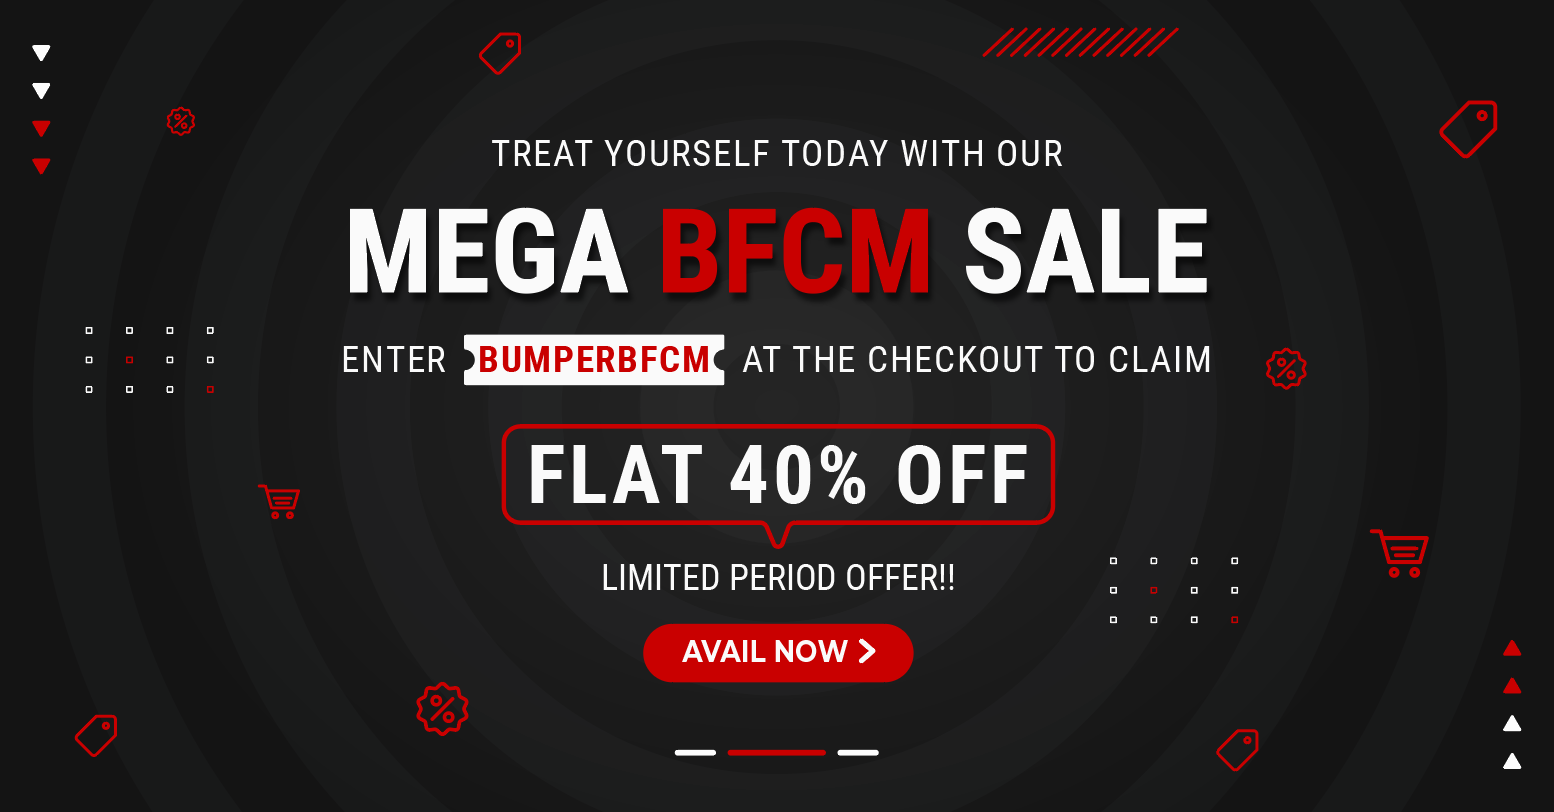 festive offers for bfcm sales